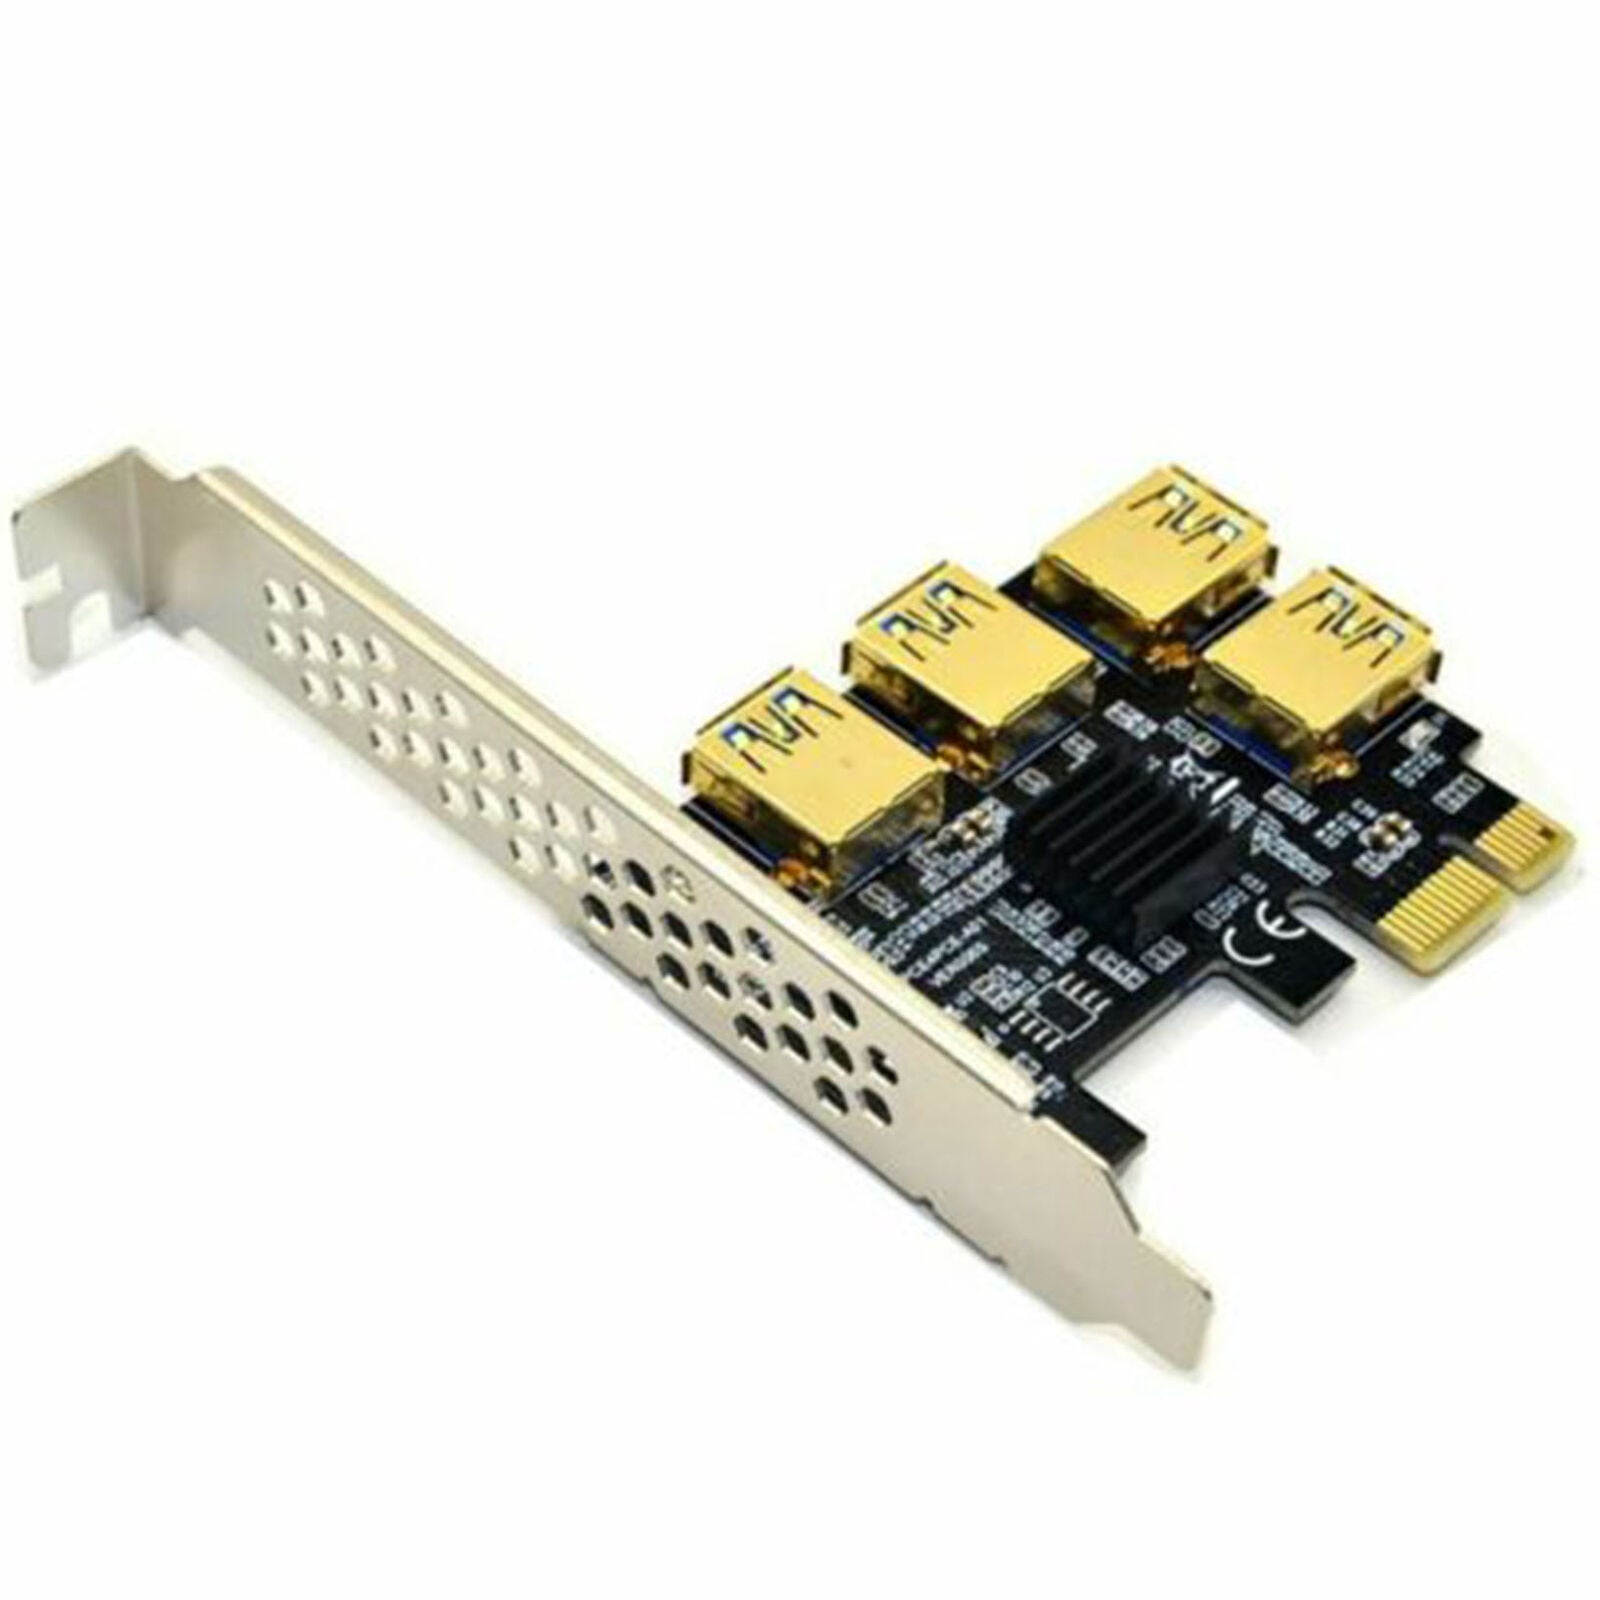 New 4 Slot USB 3.0 PCI-E Express 1x to 16x Riser Card Adapter PCIE Multiplier